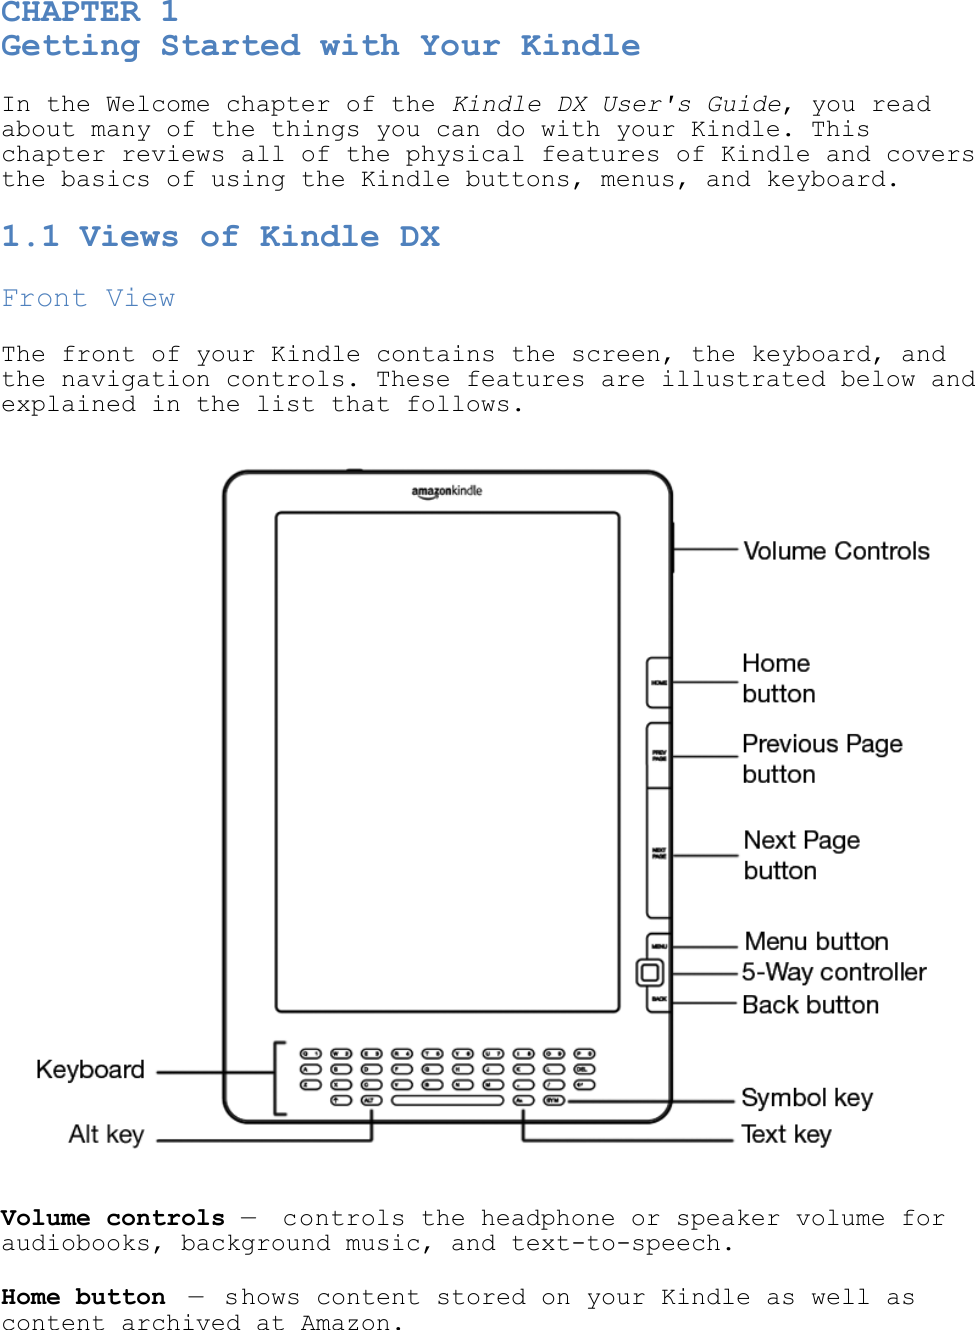   CHAPTER 1 Getting Started with Your Kindle In the Welcome chapter of the Kindle DX User&apos;s Guide, you read about many of the things you can do with your Kindle. This chapter reviews all of the physical features of Kindle and covers the basics of using the Kindle buttons, menus, and keyboard. 1.1 Views of Kindle DX Front View  The front of your Kindle contains the screen, the keyboard, and the navigation controls. These features are illustrated below and explained in the list that follows.  Volume controls —  controls the headphone or speaker volume for audiobooks, background music, and text-to-speech. Home button — shows content stored on your Kindle as well as content archived at Amazon. 